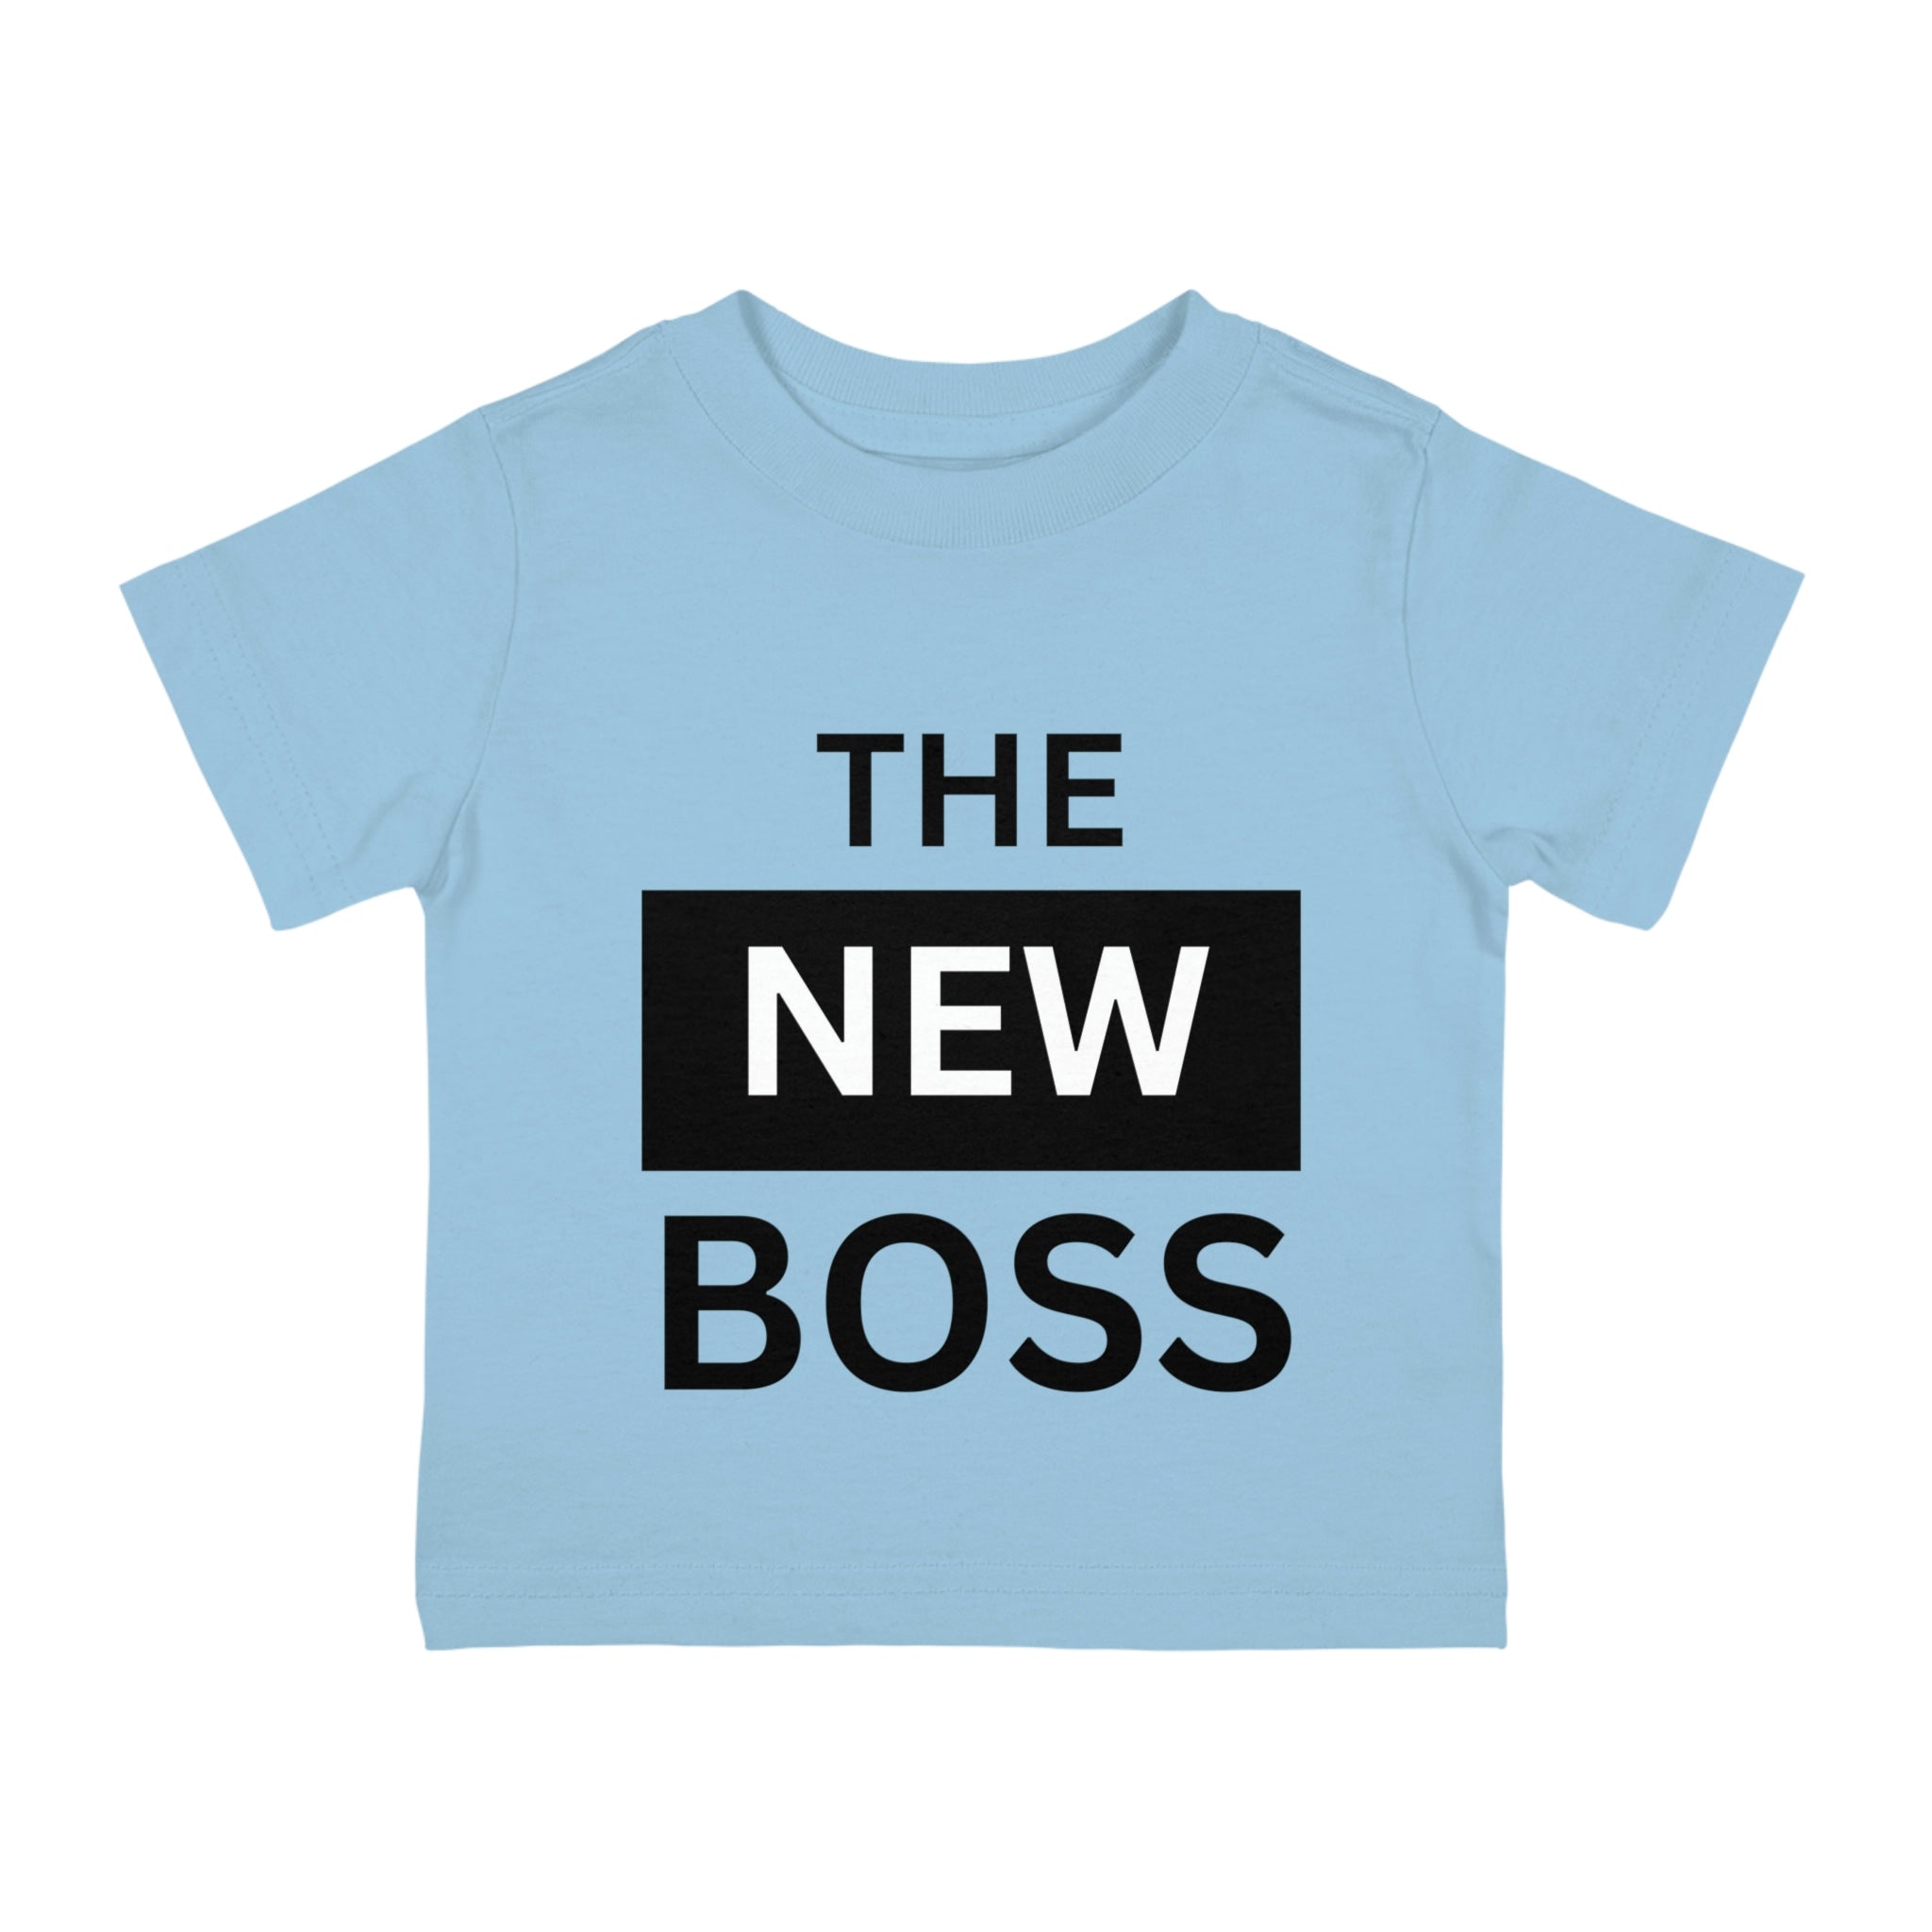 The New Boss Infant Shirt, Baby Tee, Infant Tee